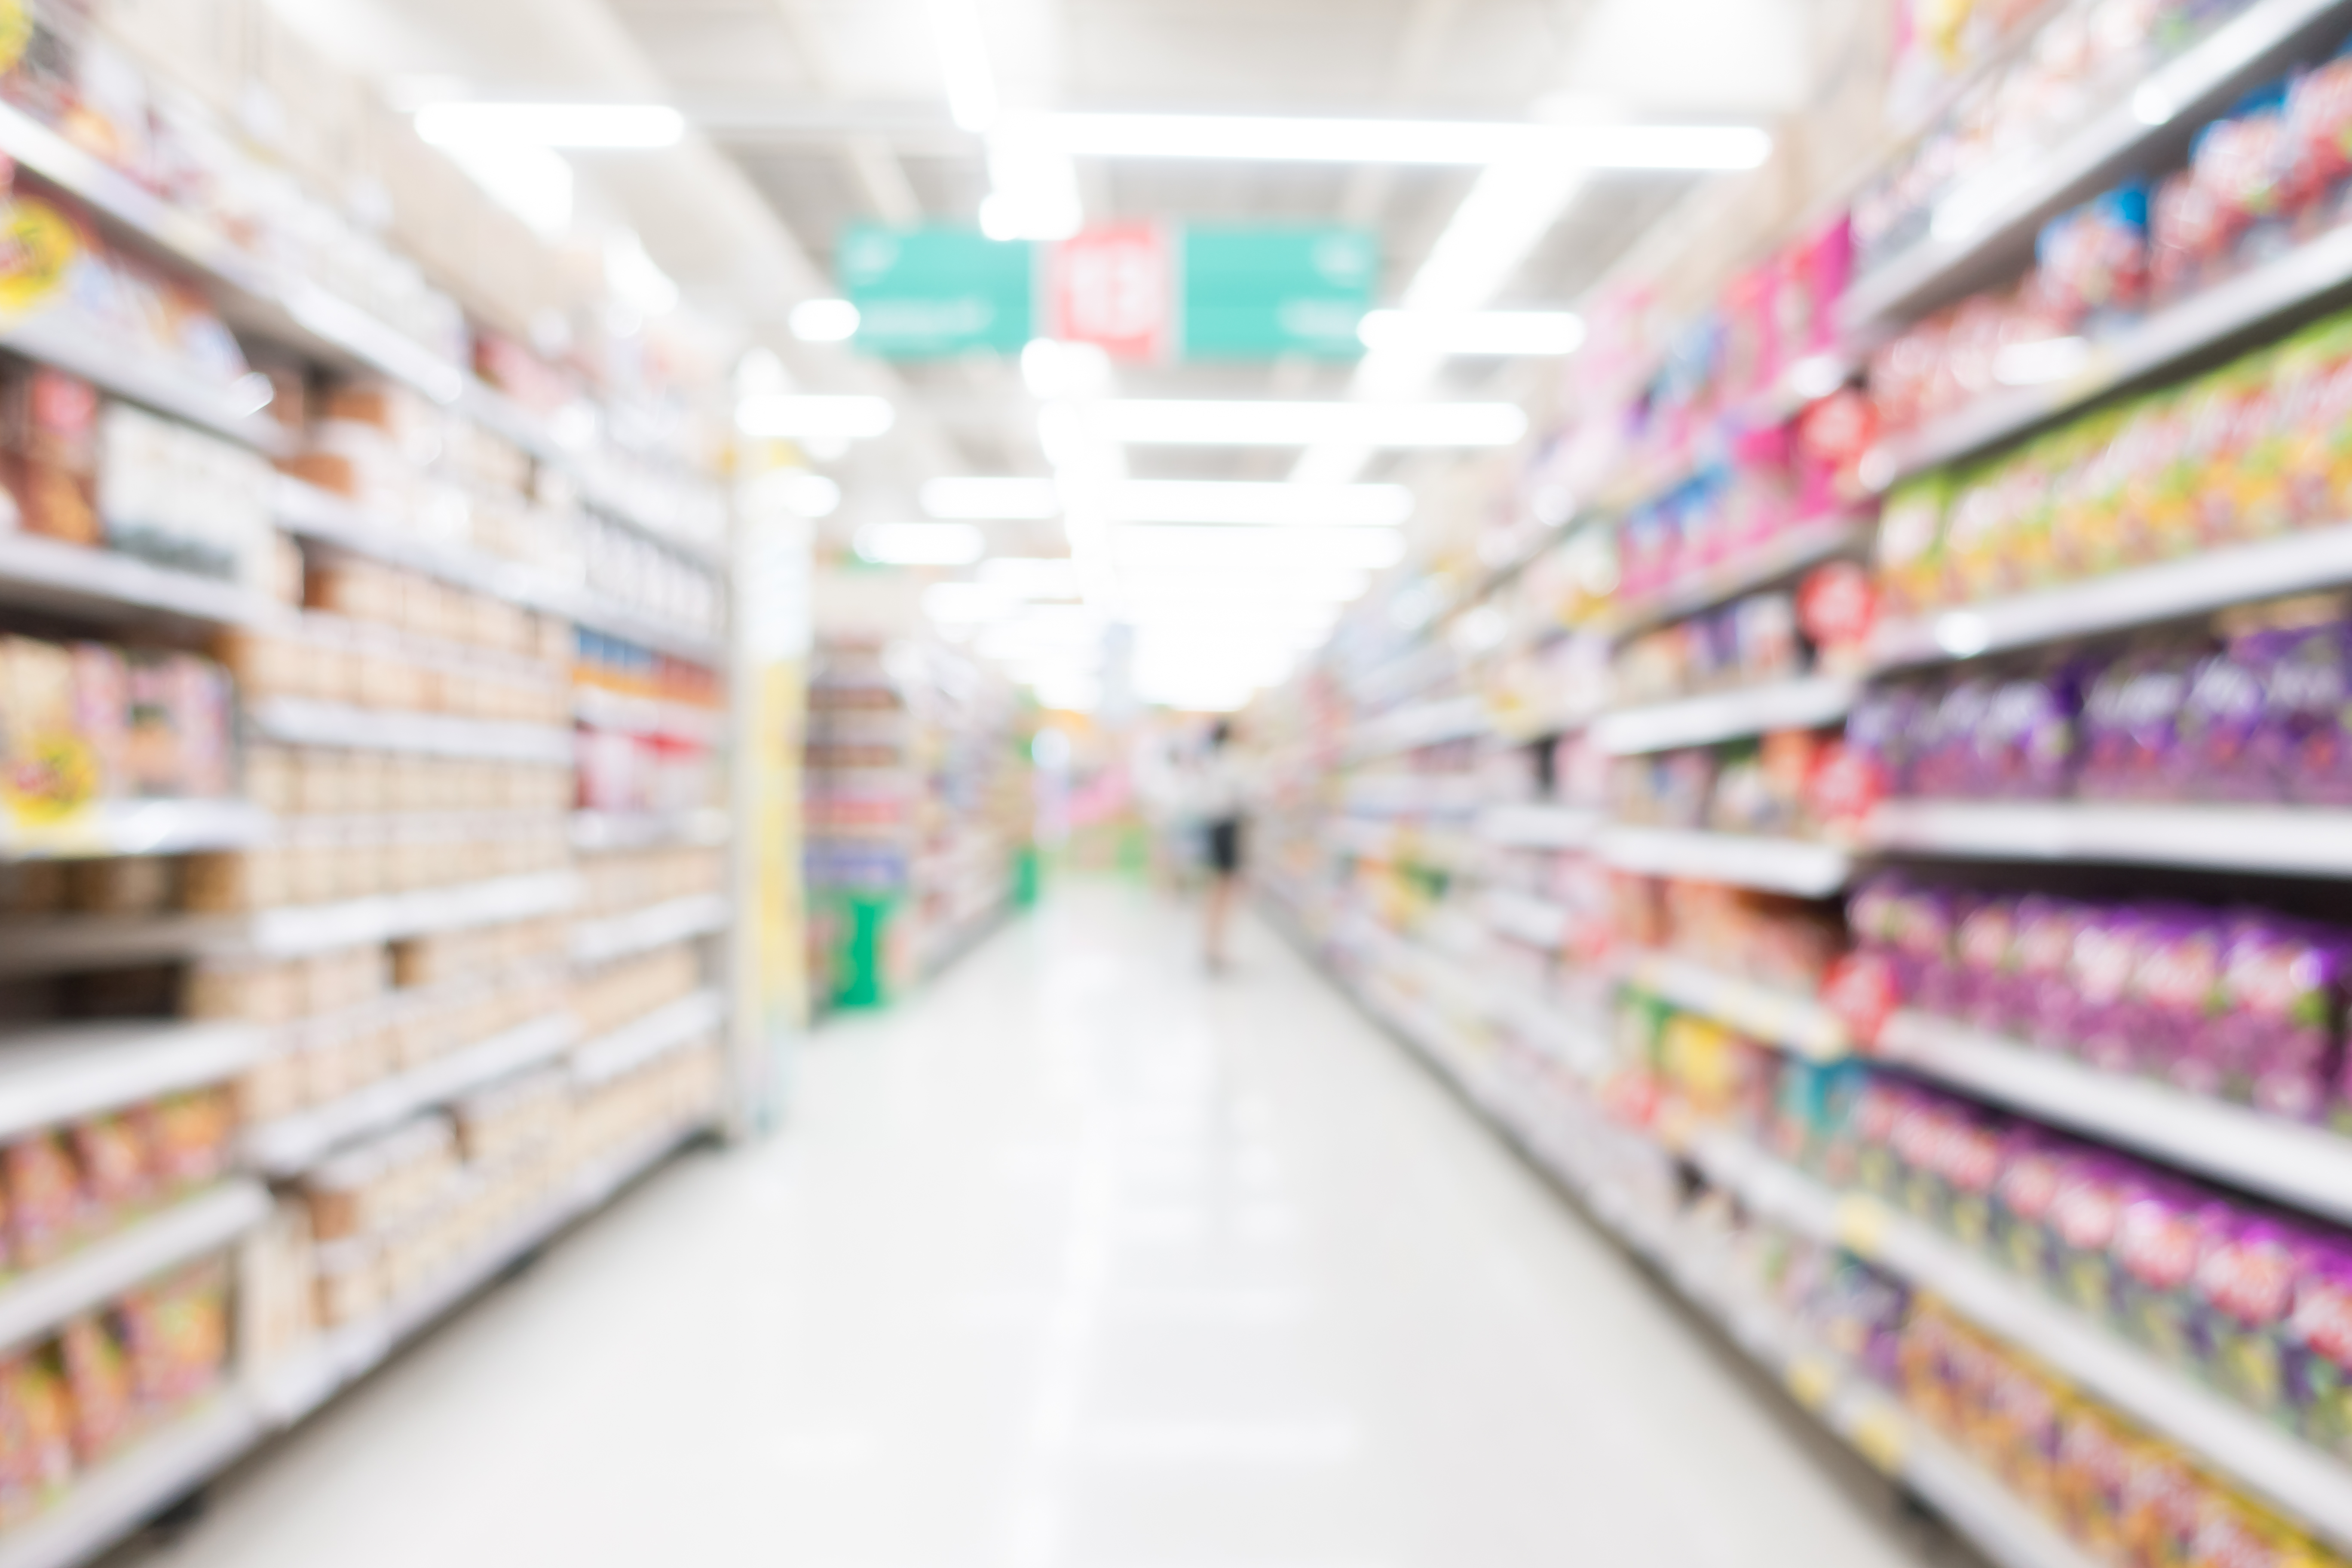 blurred view of supermarket aisle courtesy of Deposit Photos